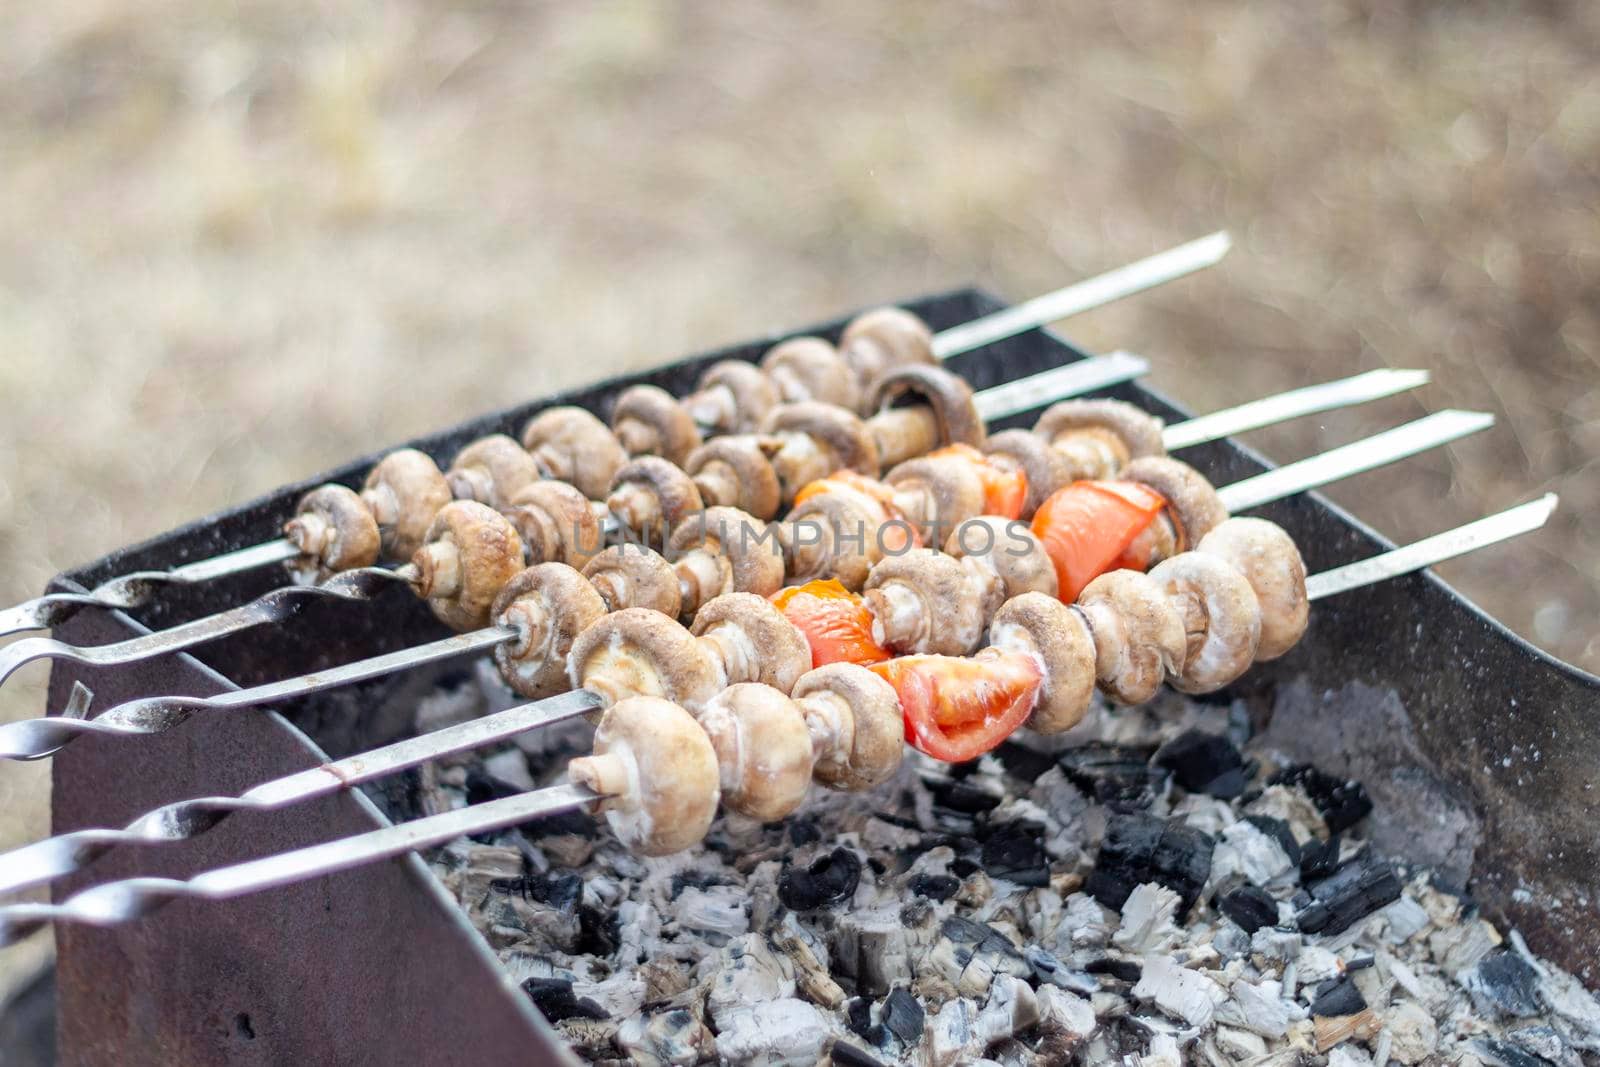 Barbeque. In nature, on the grill, mushrooms in combination with tomatoes.